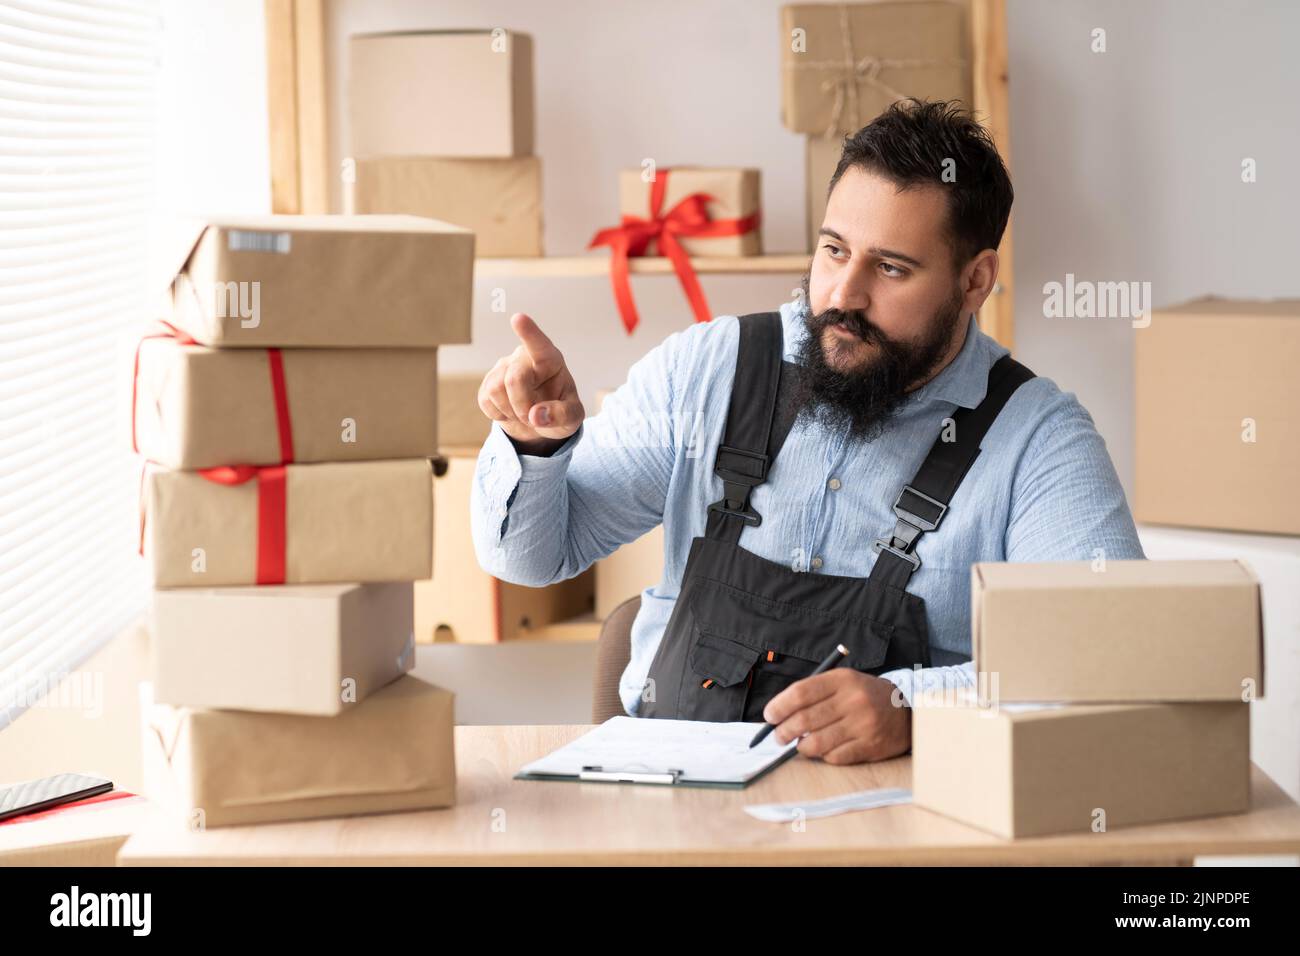 Entrepreneurs Small Business SME Independent Indian men work at home, commercial checking cardboard box, online marketing, packing boxes, SME sellers Stock Photo